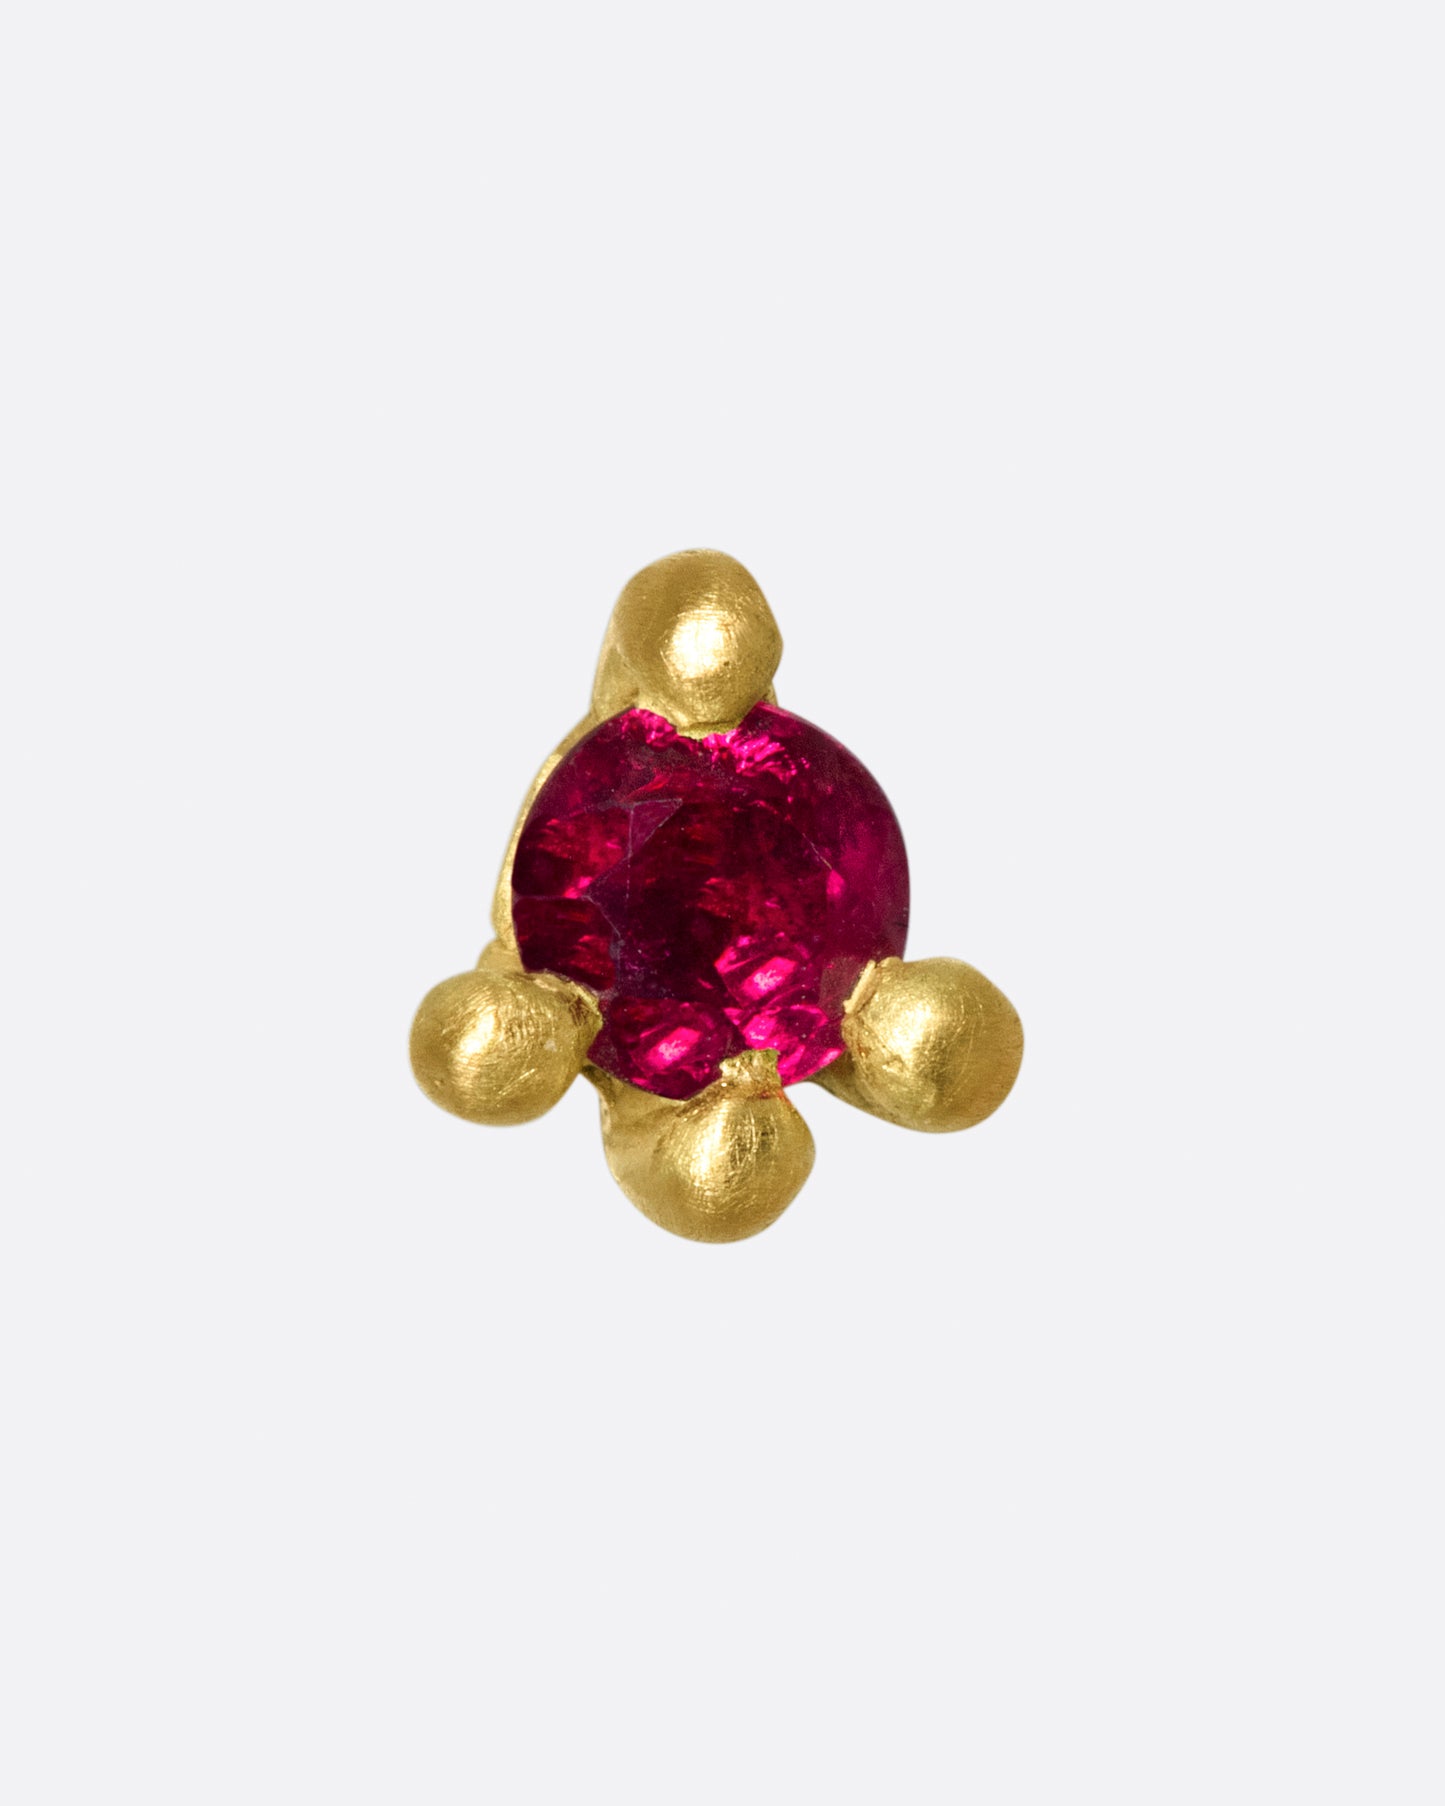 This earring is really about the ruby; large and saturated, it's a statement in itself.